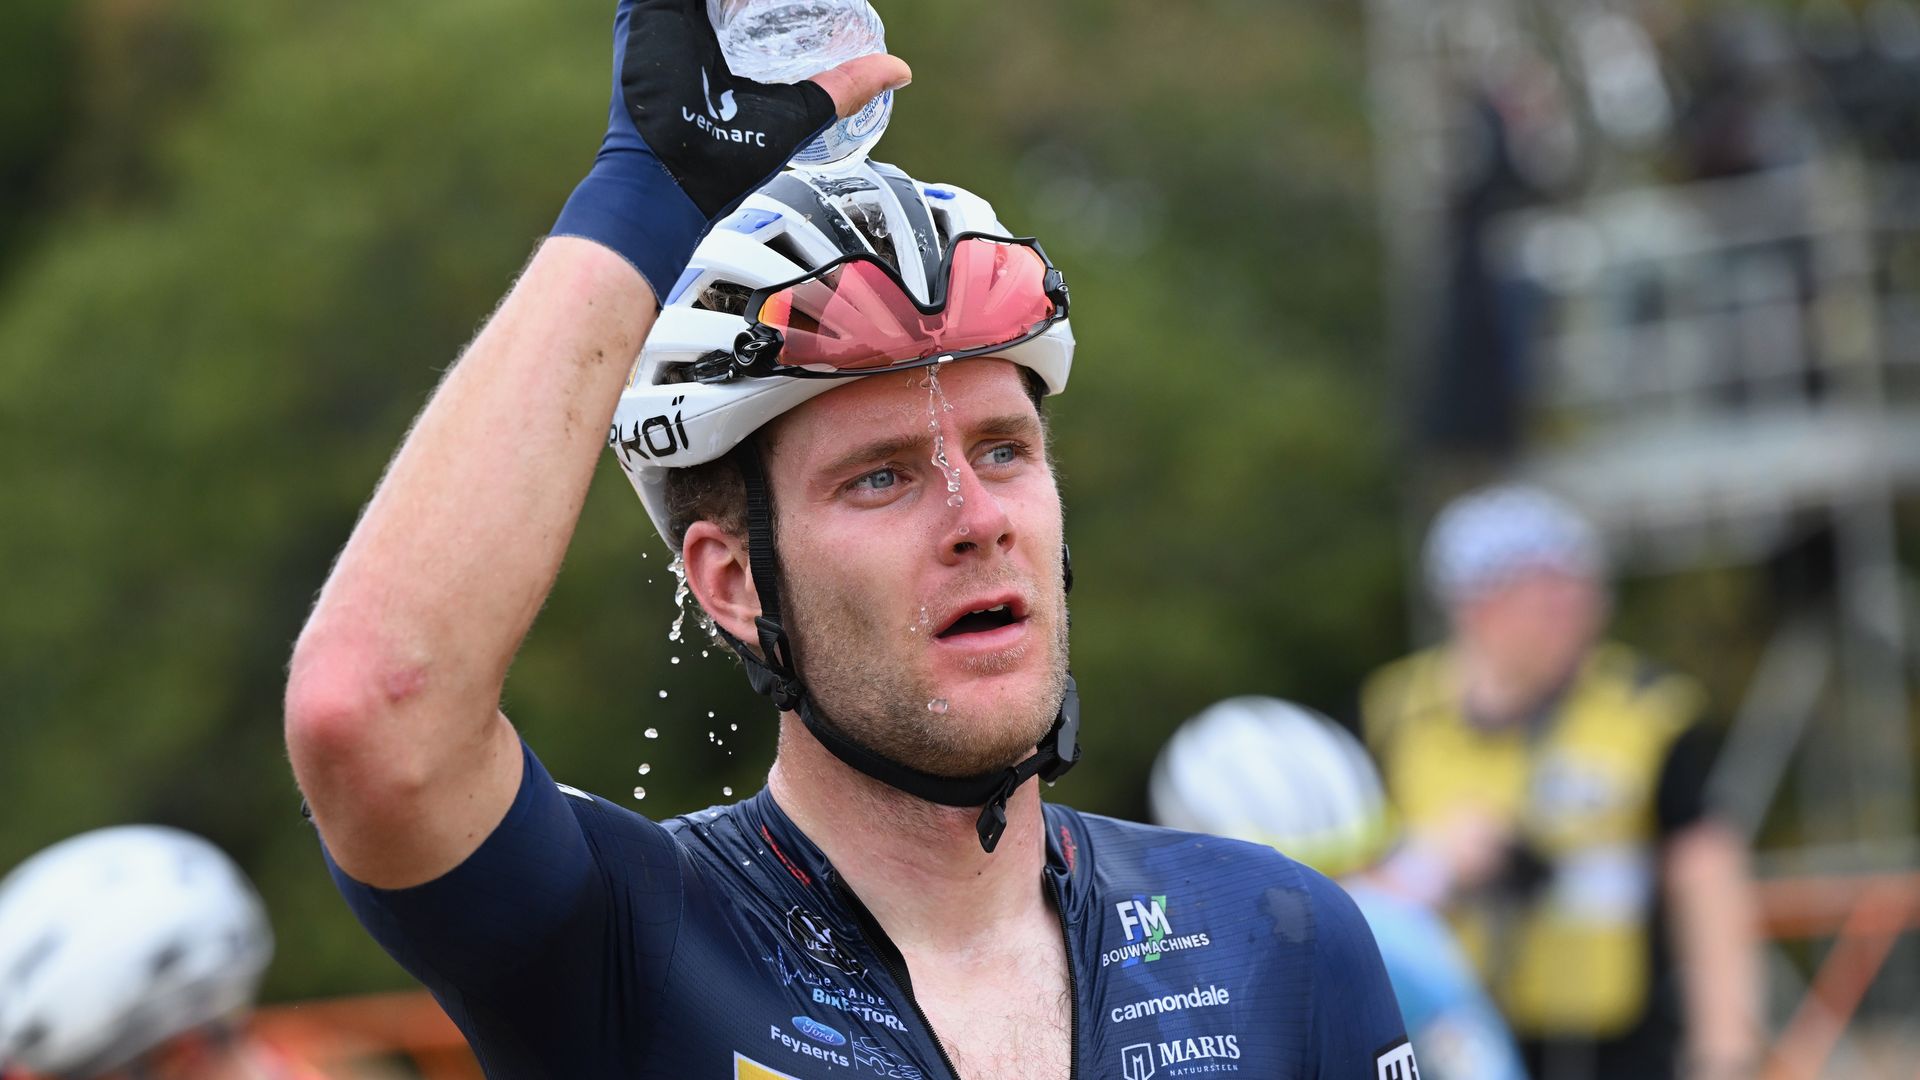 Photo of a cyclist pouring water on his head